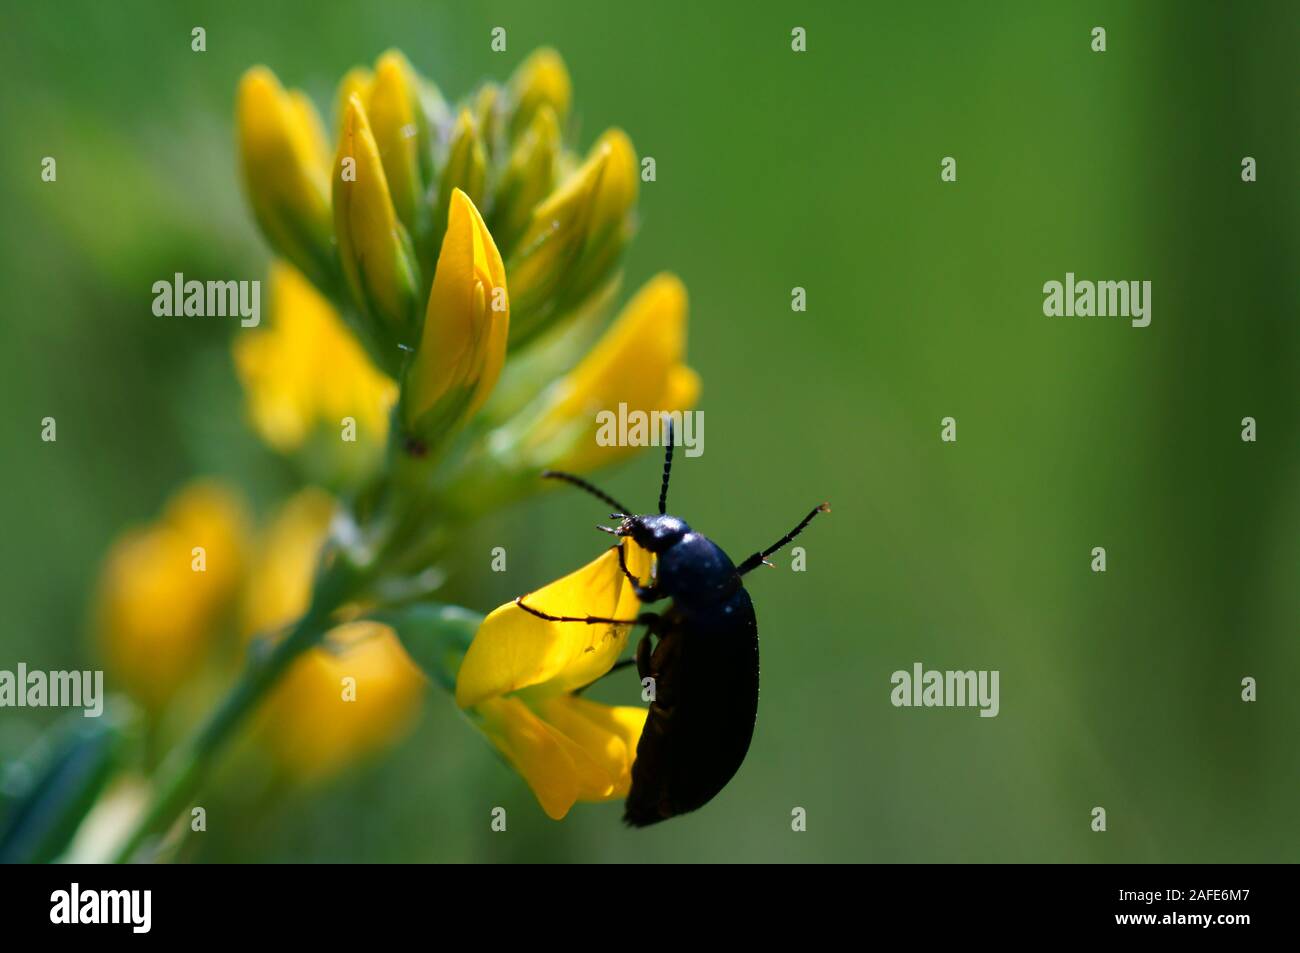 Photos of beautiful insects in nature. Natural background. Beauty of nature. Stock Photo